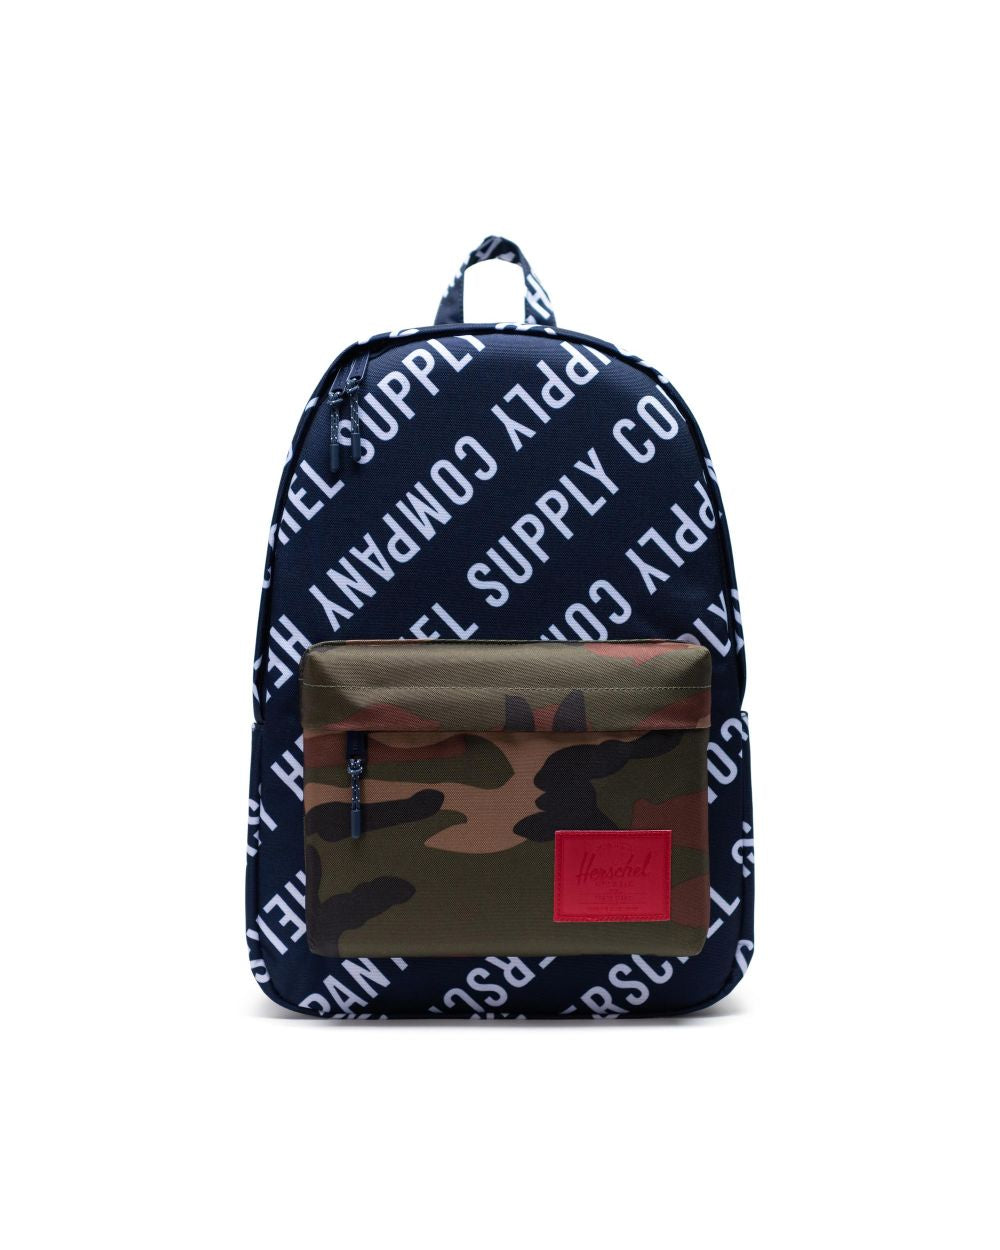 Herschel Supply Co. Classic Backpack XL - Roll Call Peacoat/Woodland Camo